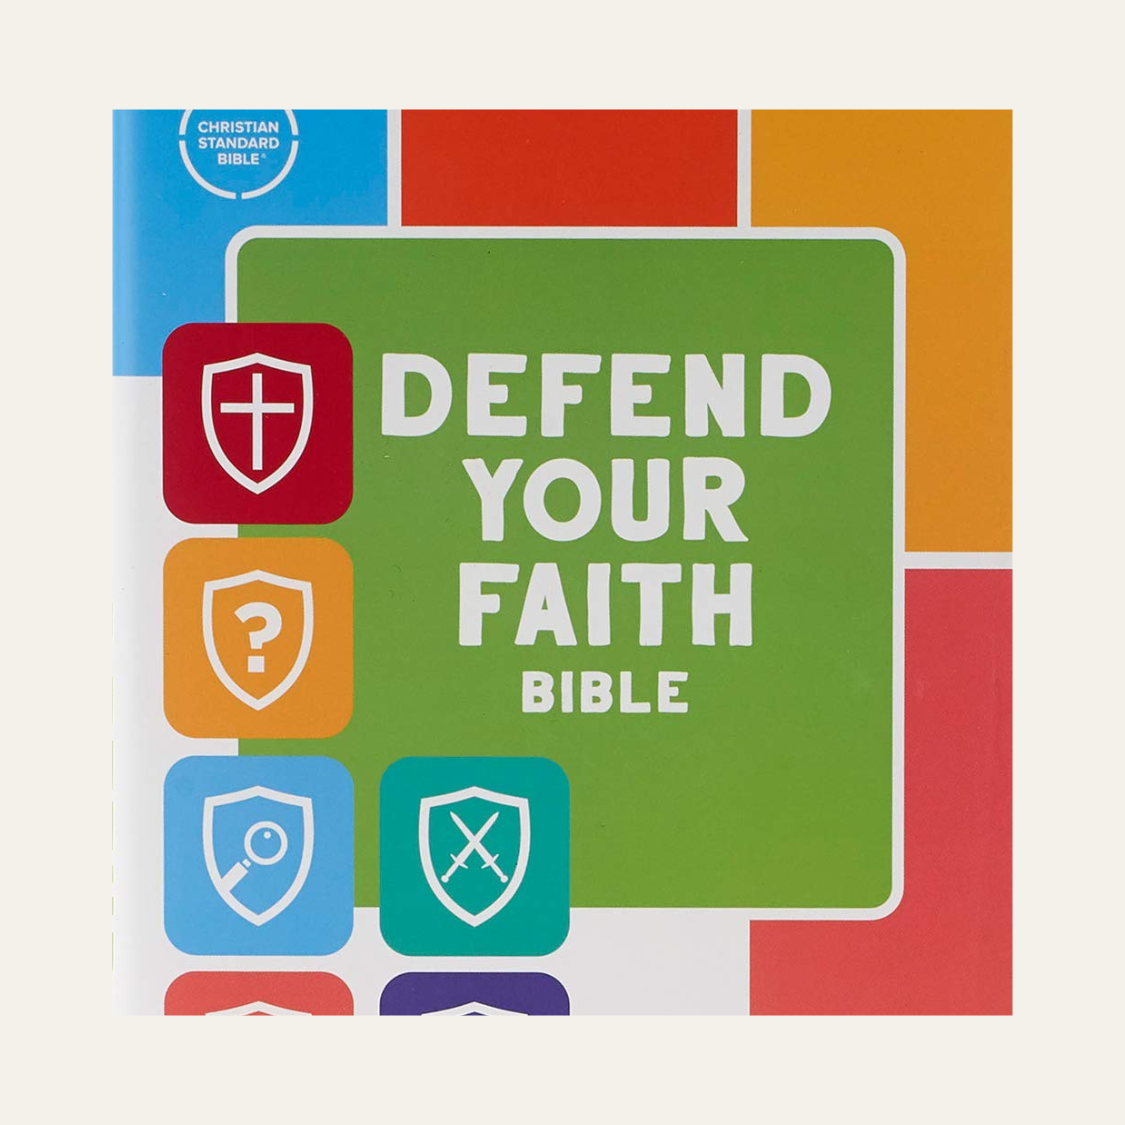 Defend Your Faith Bible.png